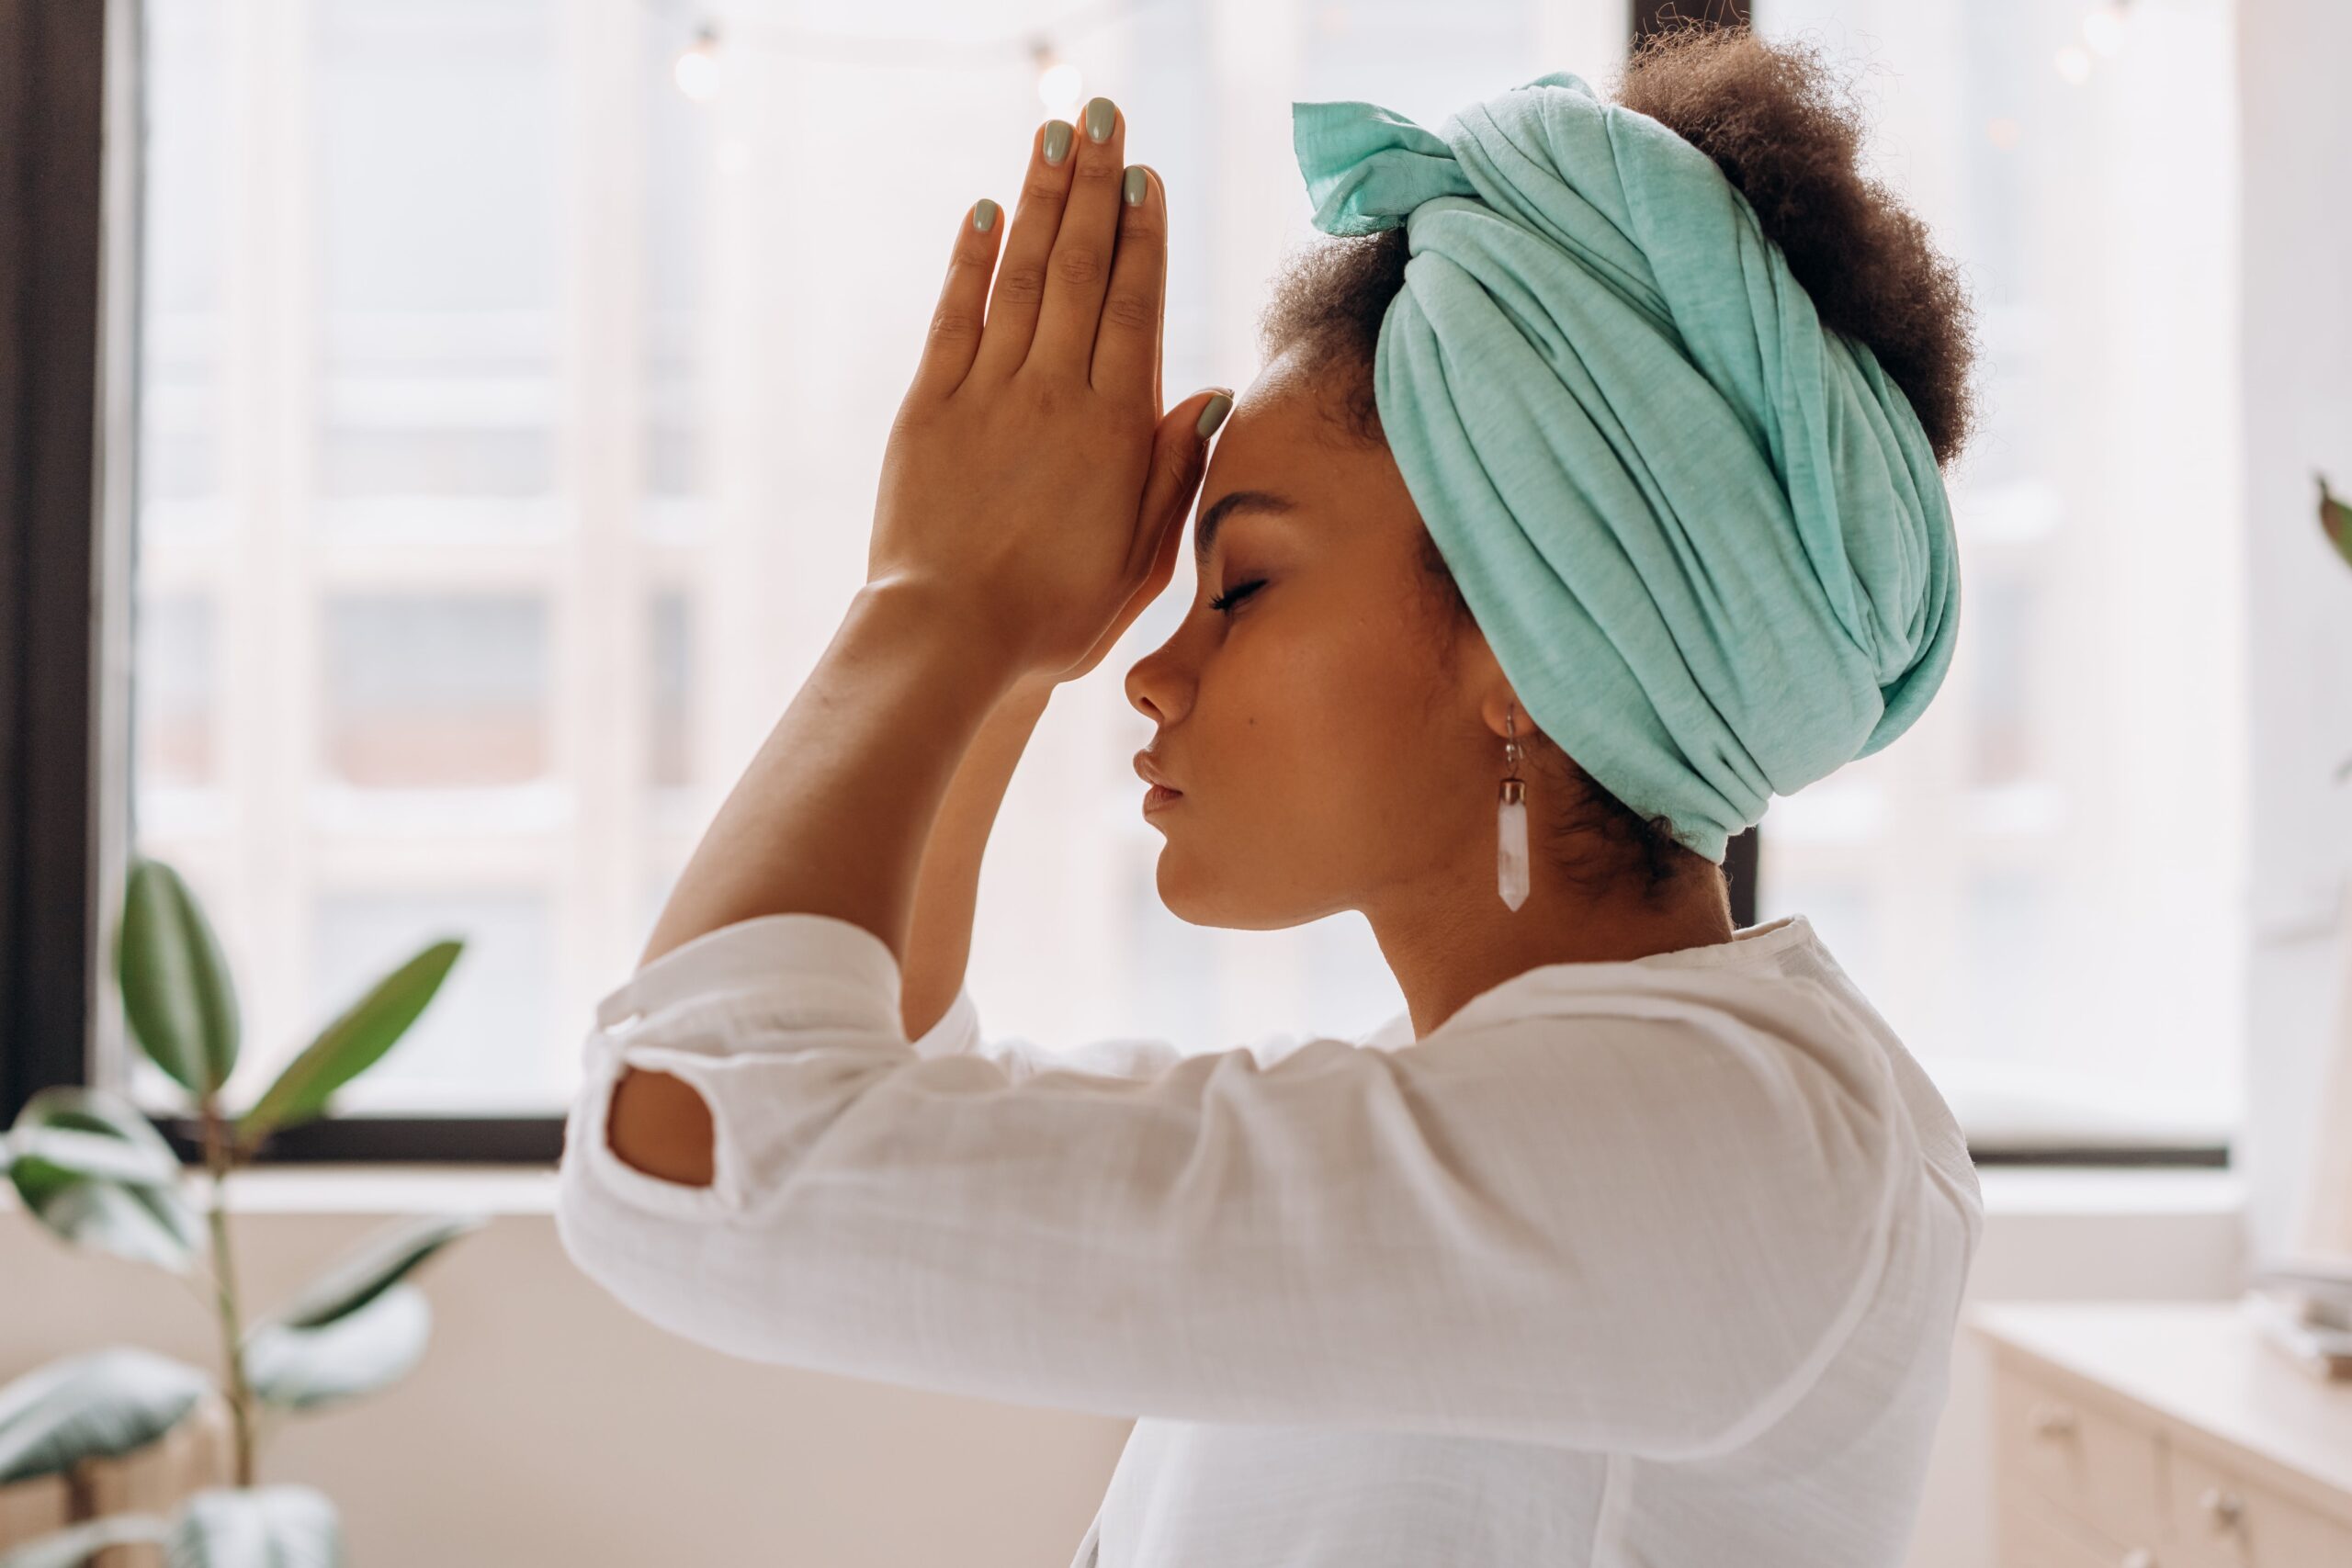 A side view of a woman with her hands in a prayer mudra at her third eye to signify connecting to and following her intuition.